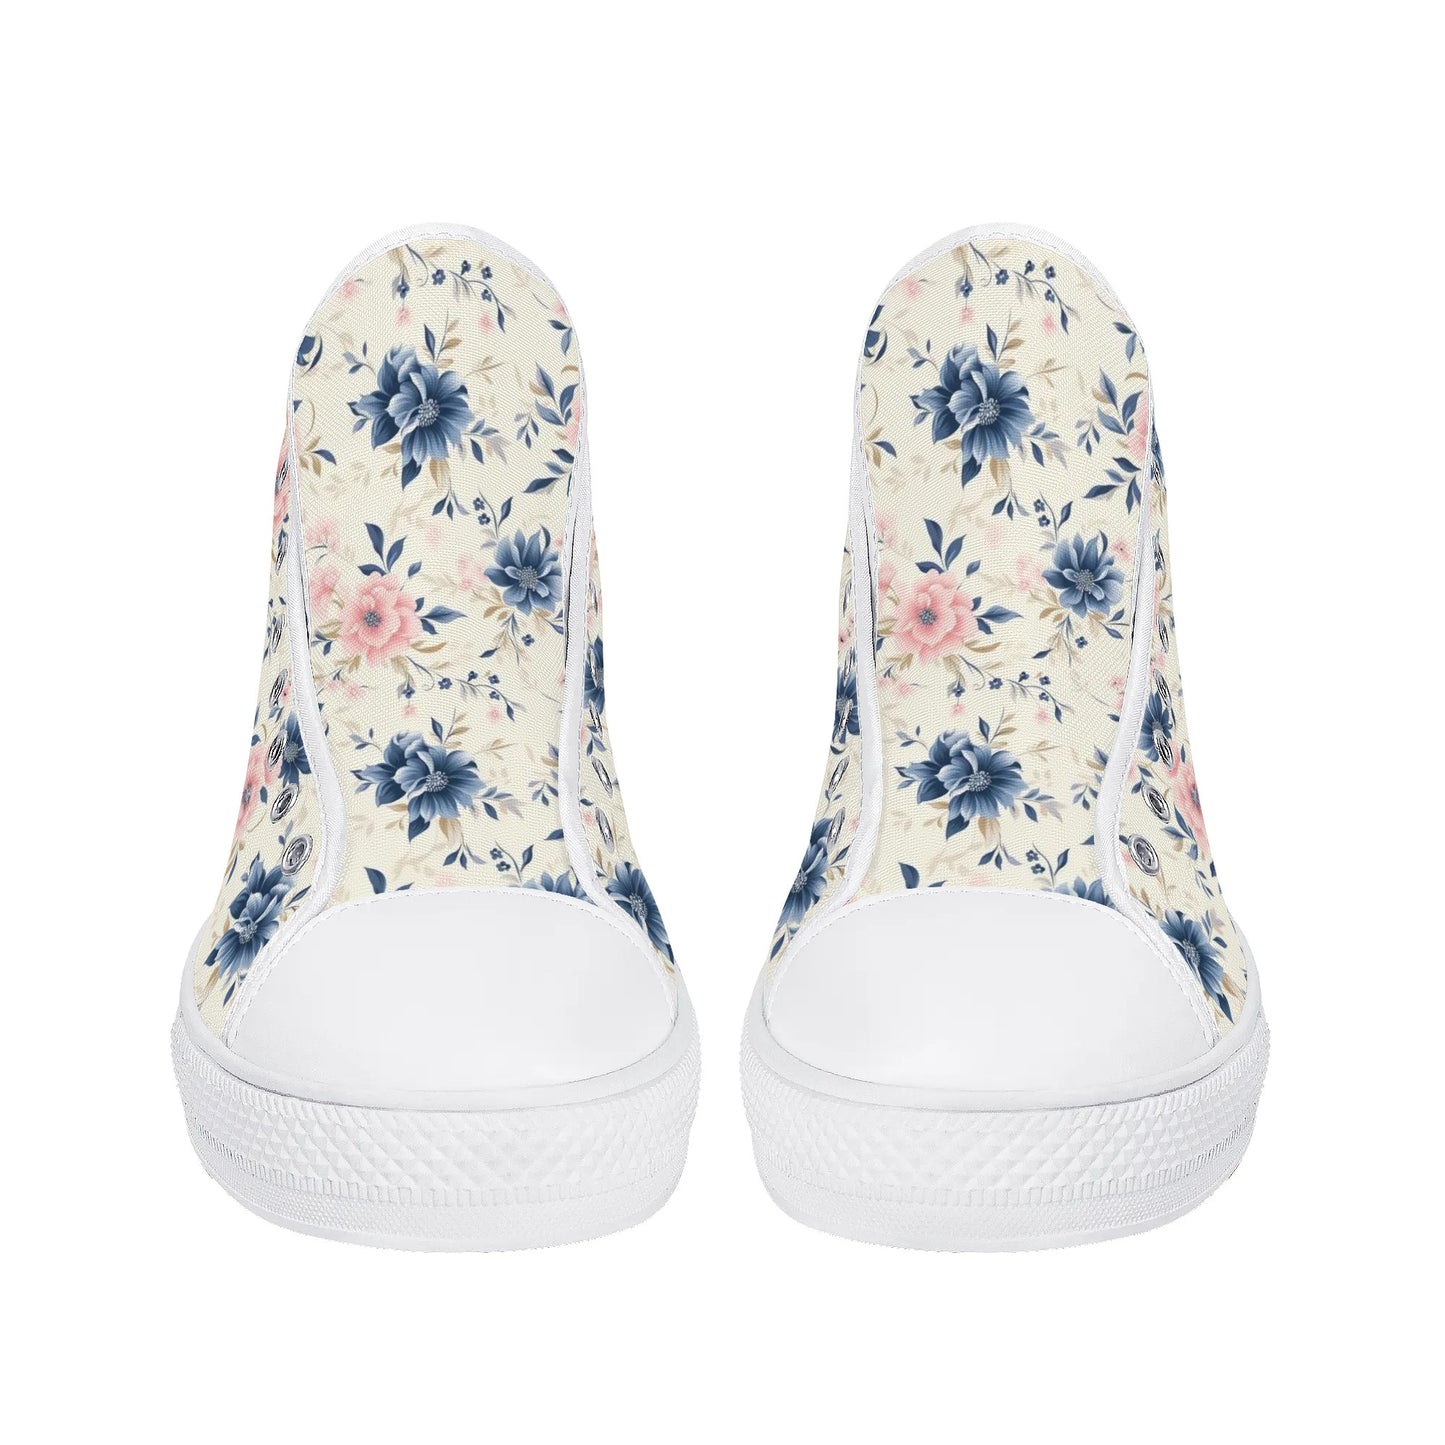 Blue Pink Floral Women High Top Shoes, Flowers Cream Lace Up Sneakers Footwear Canvas Streetwear Ladies Girls White Trainers Designer Gift